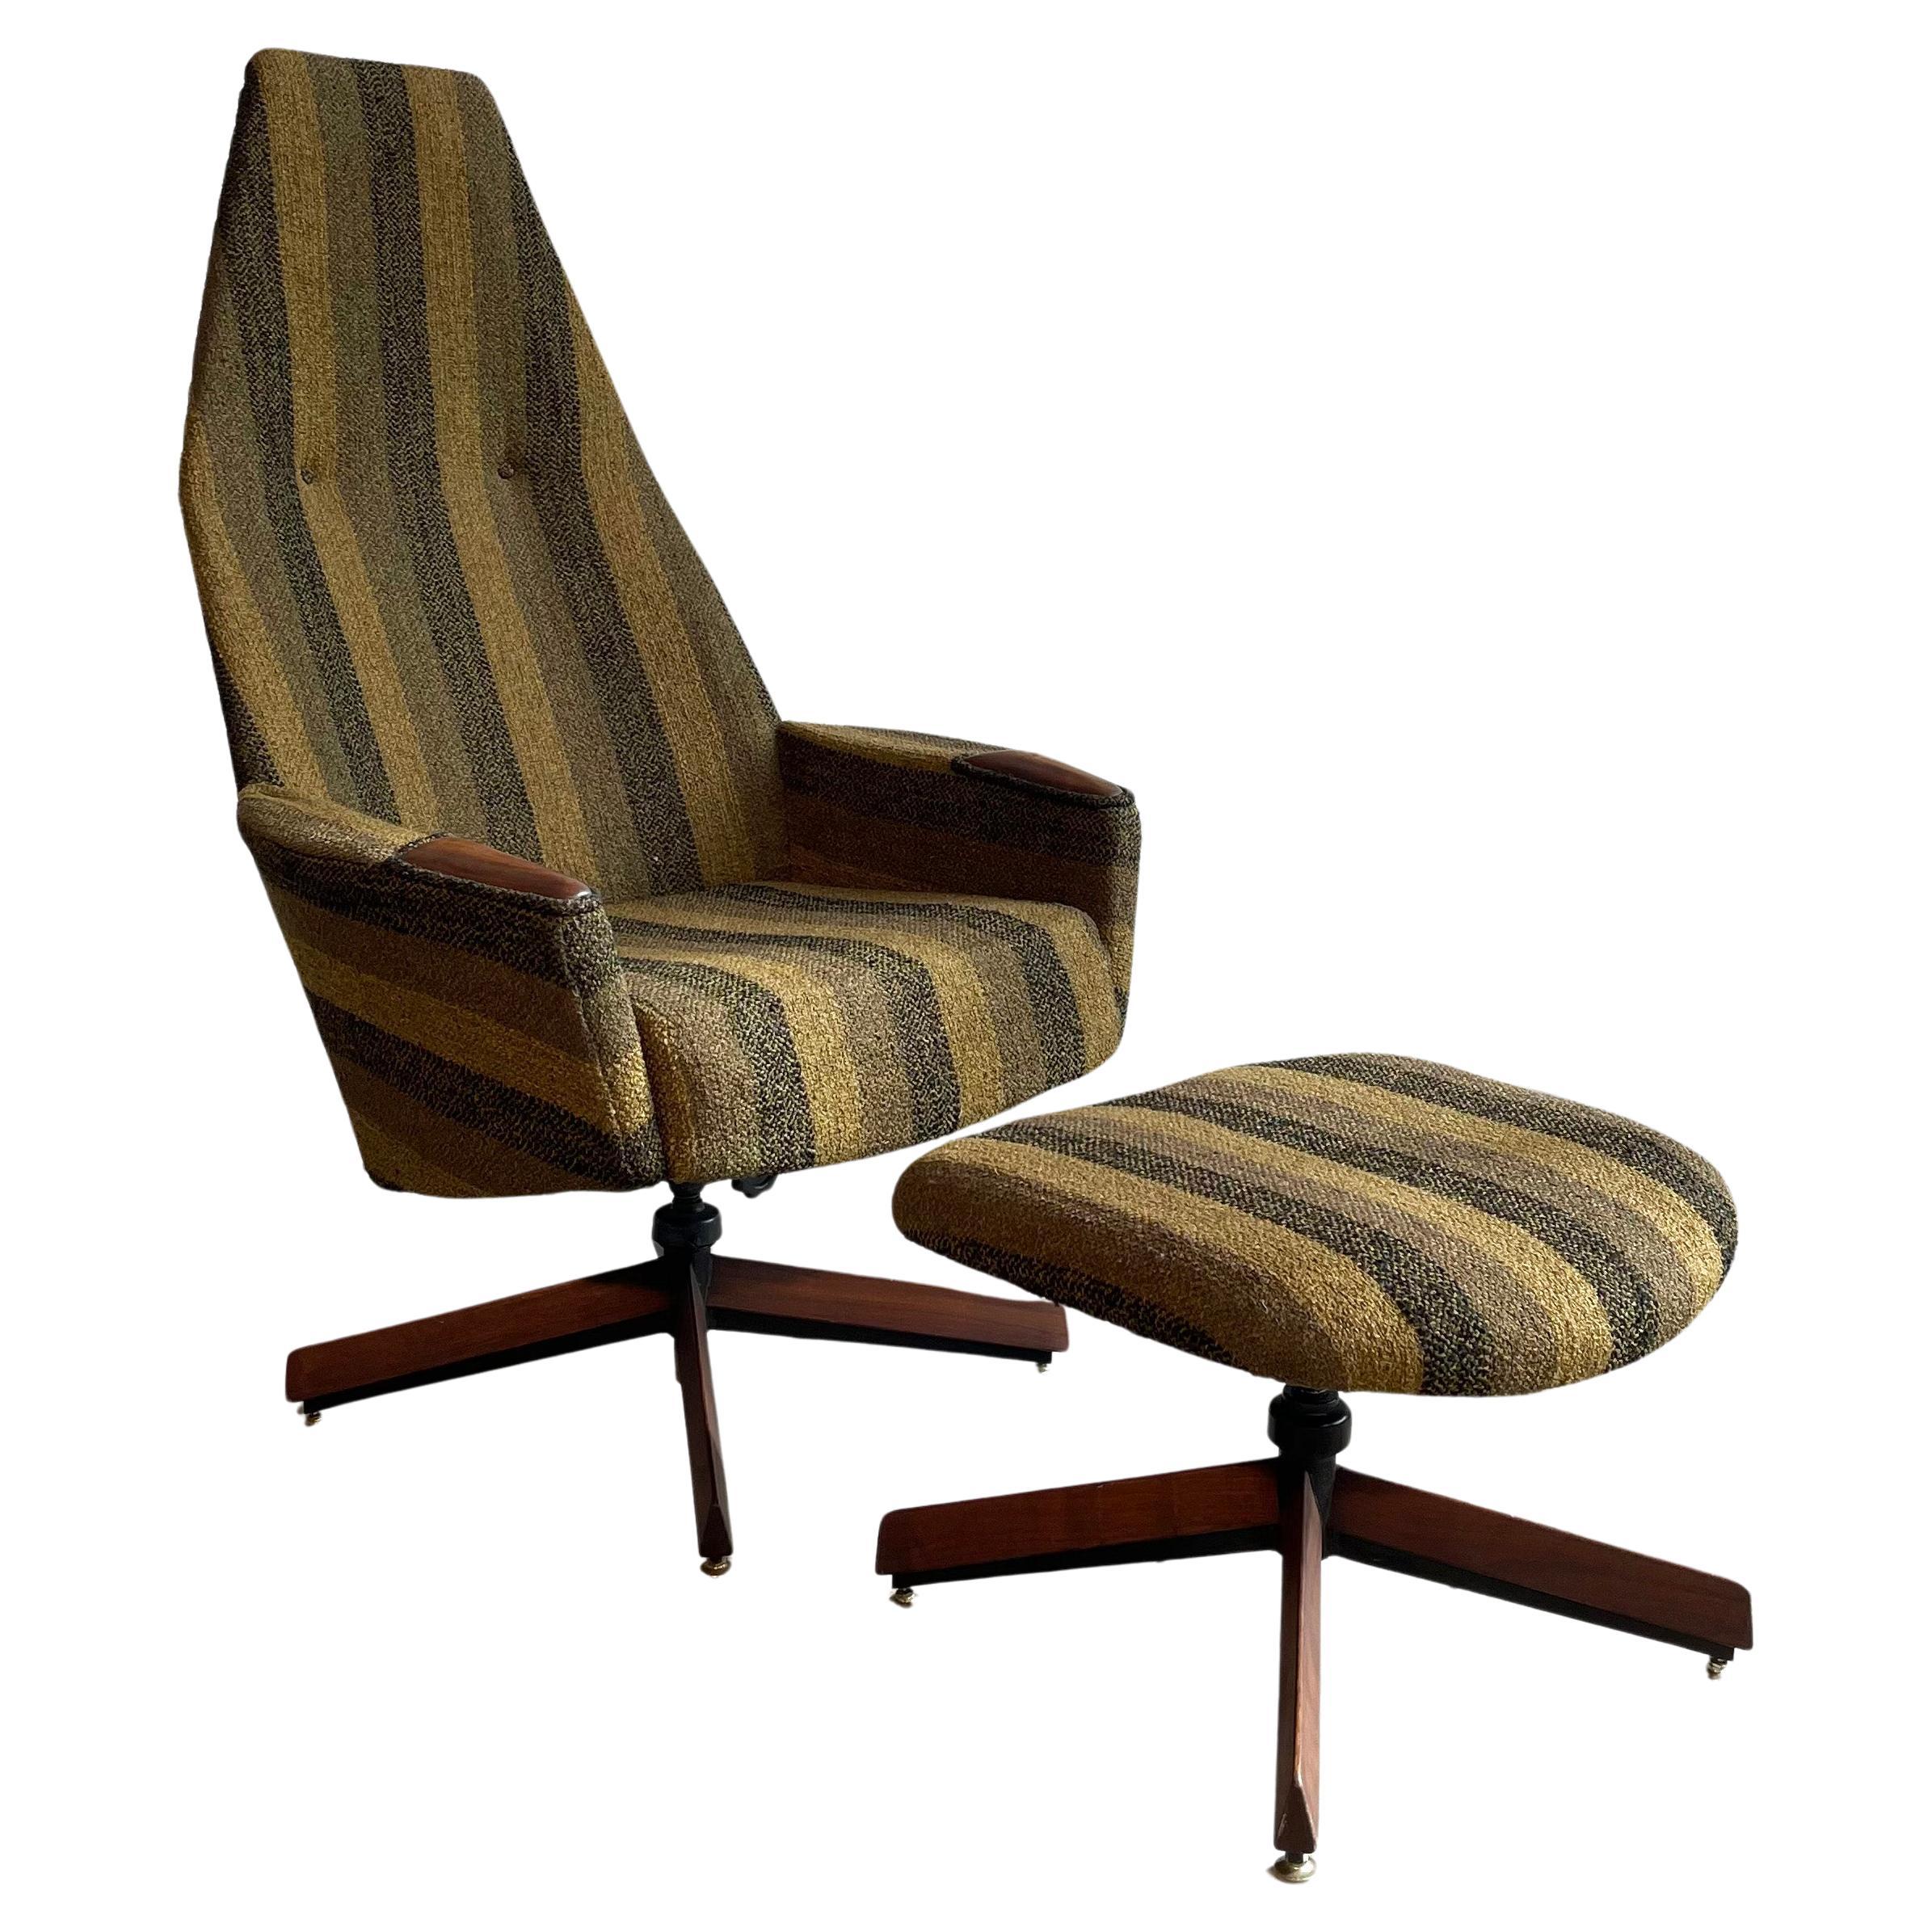 Mid-Century Modern Lounge Chair Ottoman Set By Adrian Pearsall, Craft Associates For Sale